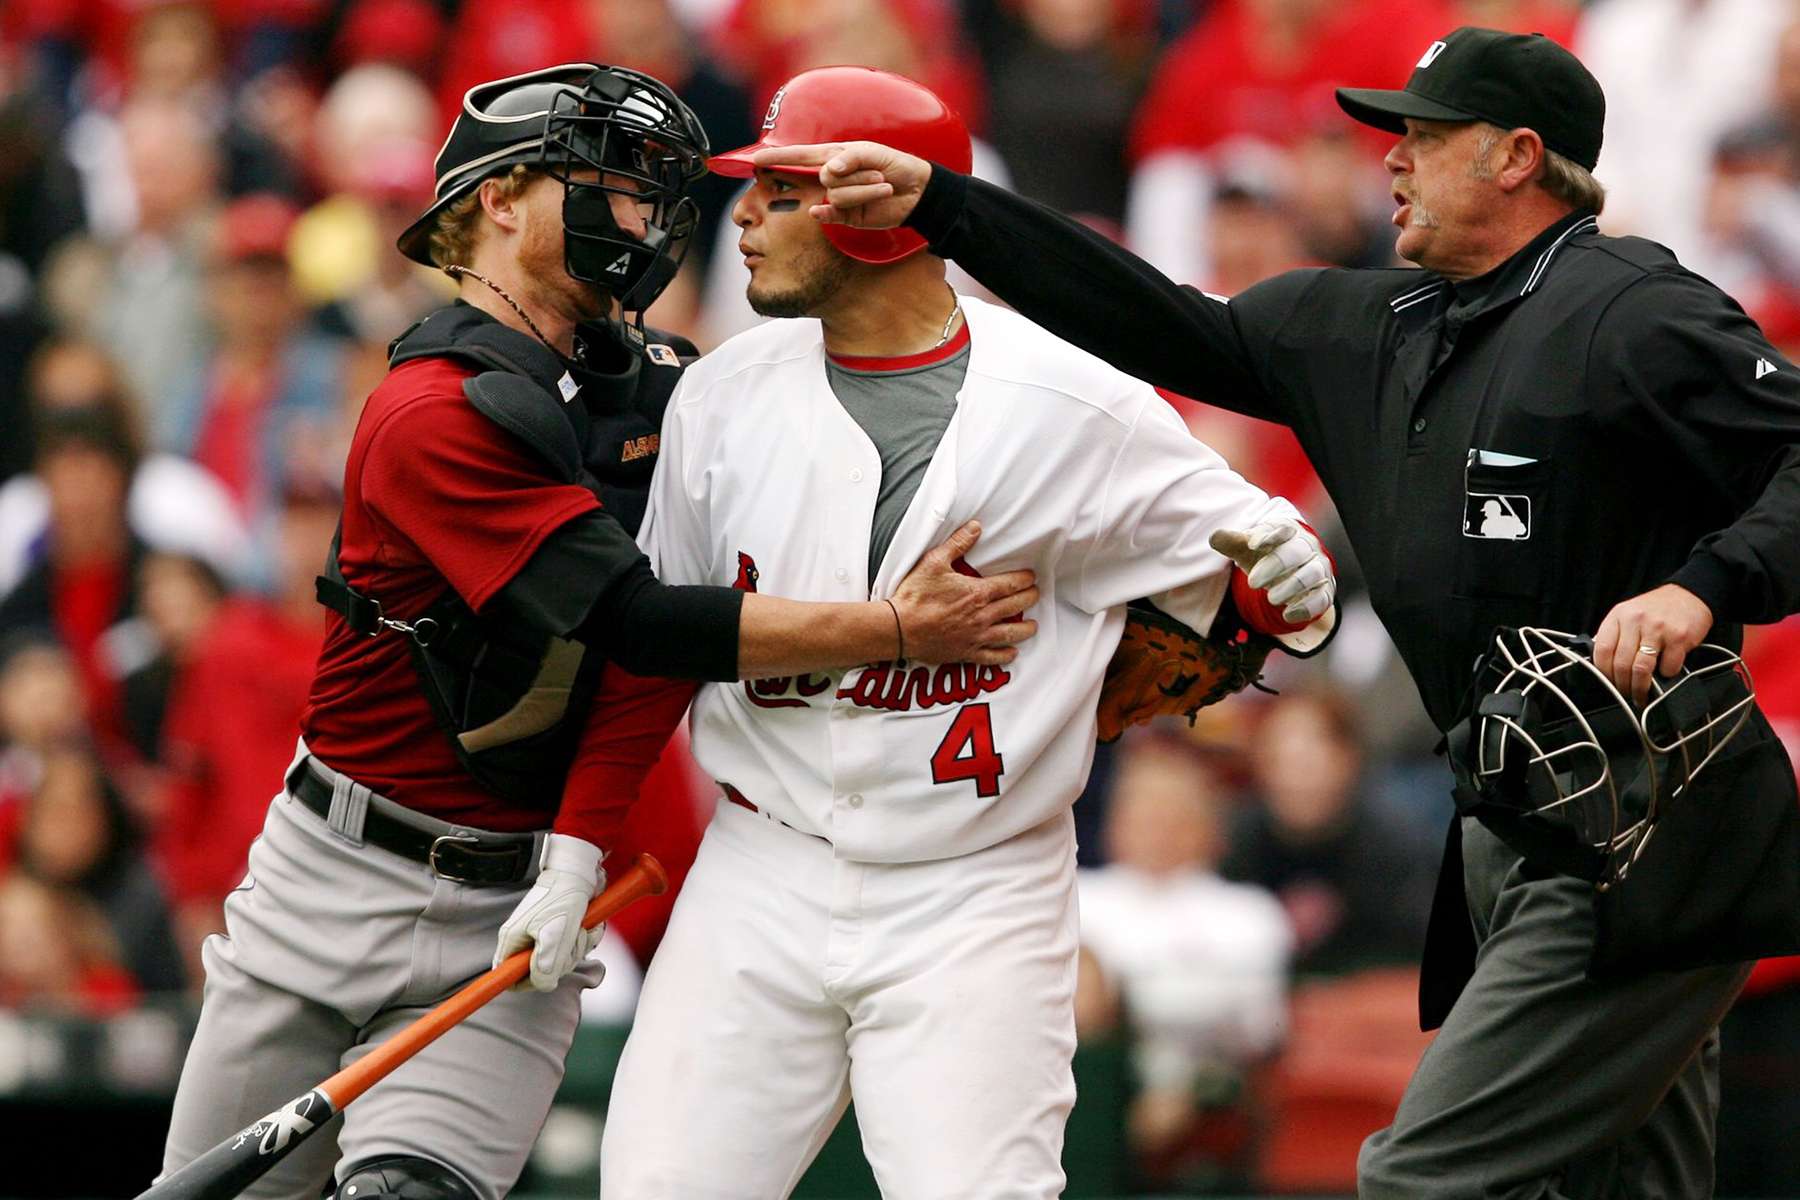 Houston Astros catcher Justin Towles tried to restrain St. Louis Cardinals' Yadier Molina as he charged towards pitcher Brandon Backe over a questionable inside pitch during an MLB game at Busch Stadium in St. Louis. 